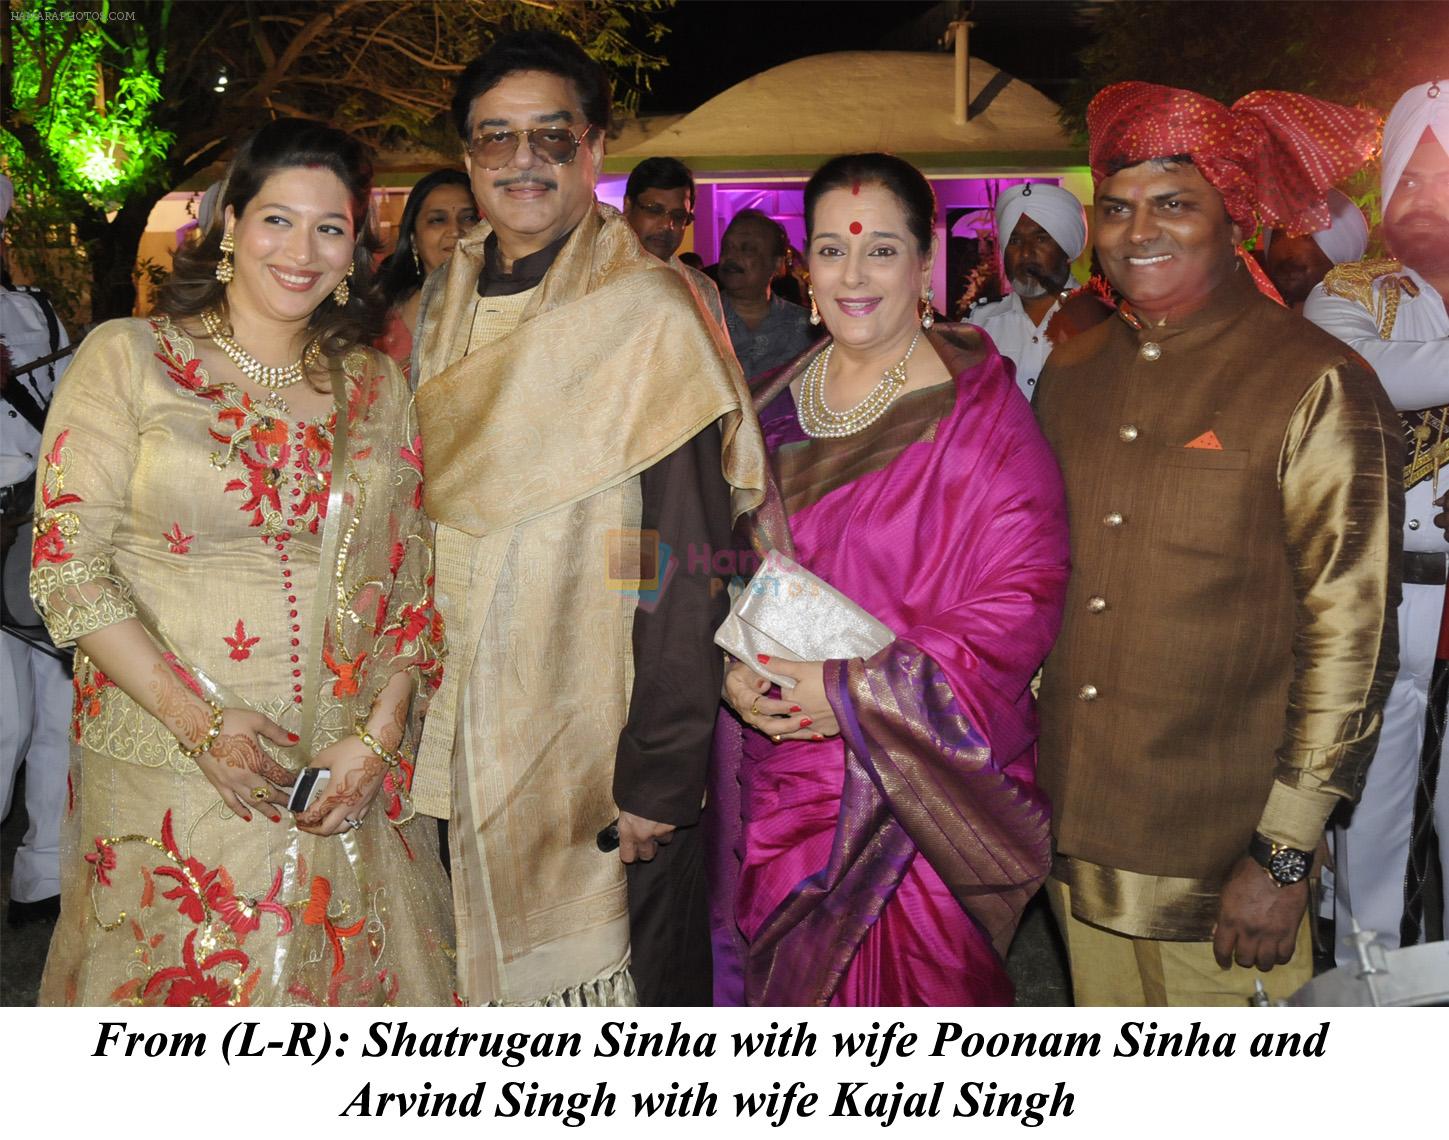 Shatrugan Sinha with wife Poonam Sinha and Arvind Singh with wife Kajal Singh at the Reception of Jai Singh and Shradha Singh on 7th May 2013